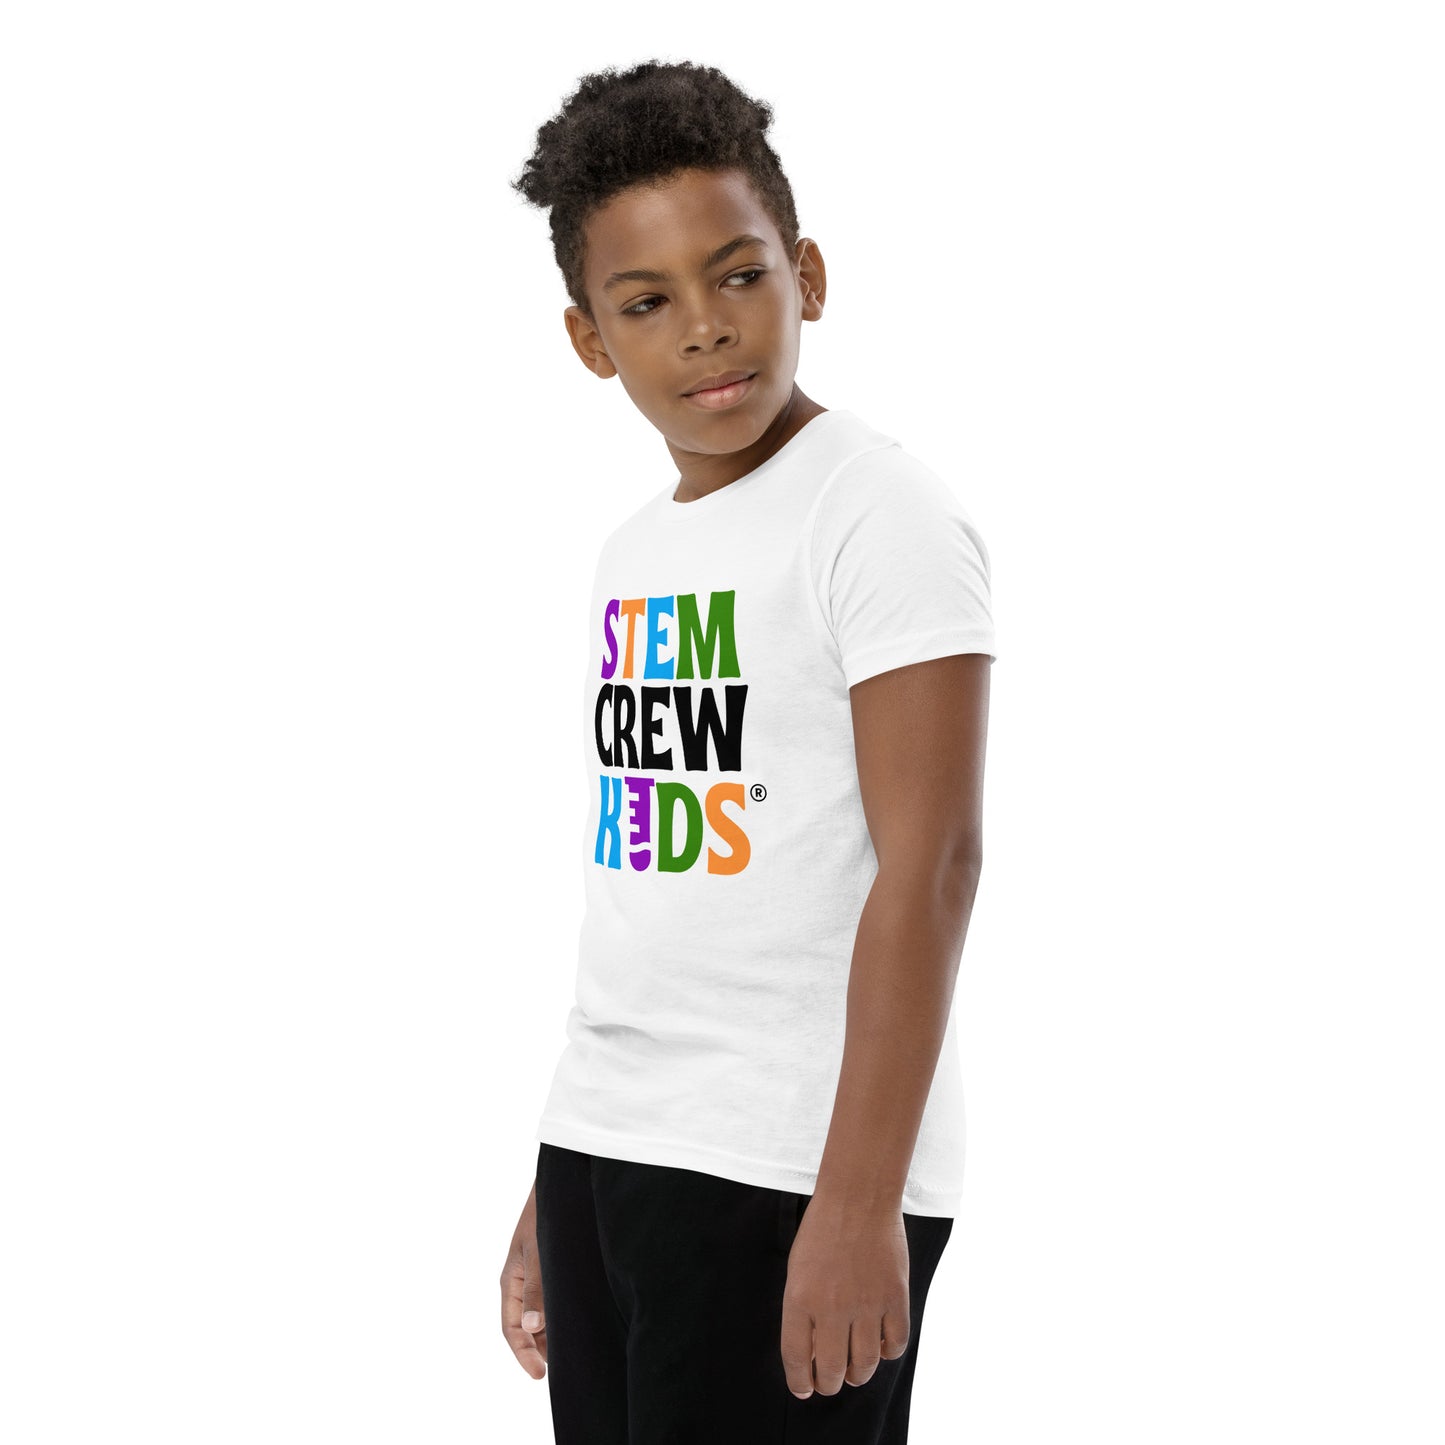 STEM Crew Kids Youth Short Sleeve T-Shirt (Colorful)